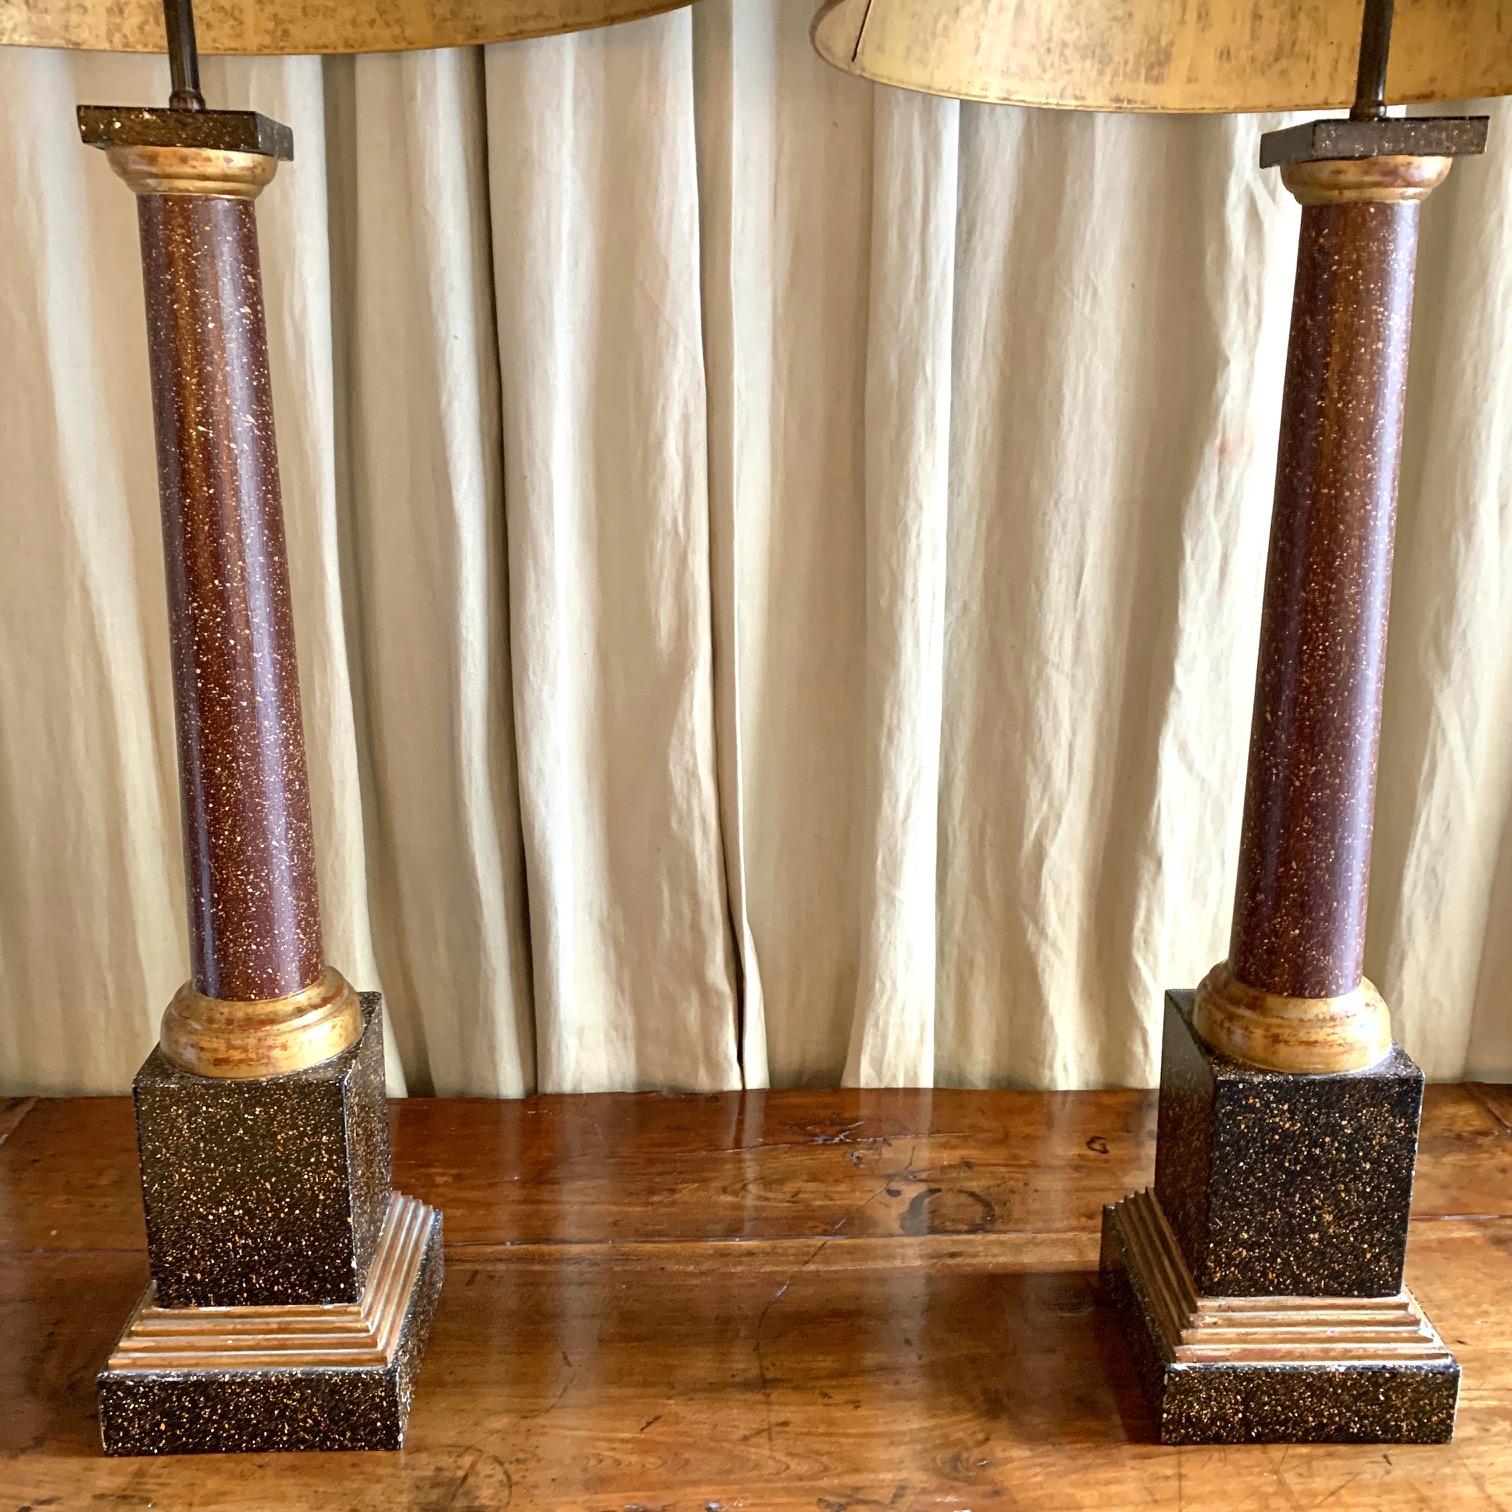 Midcentury Neoclassical Metal and Faux Phorphyry Table Lamps Jansen Style, Pair For Sale 4